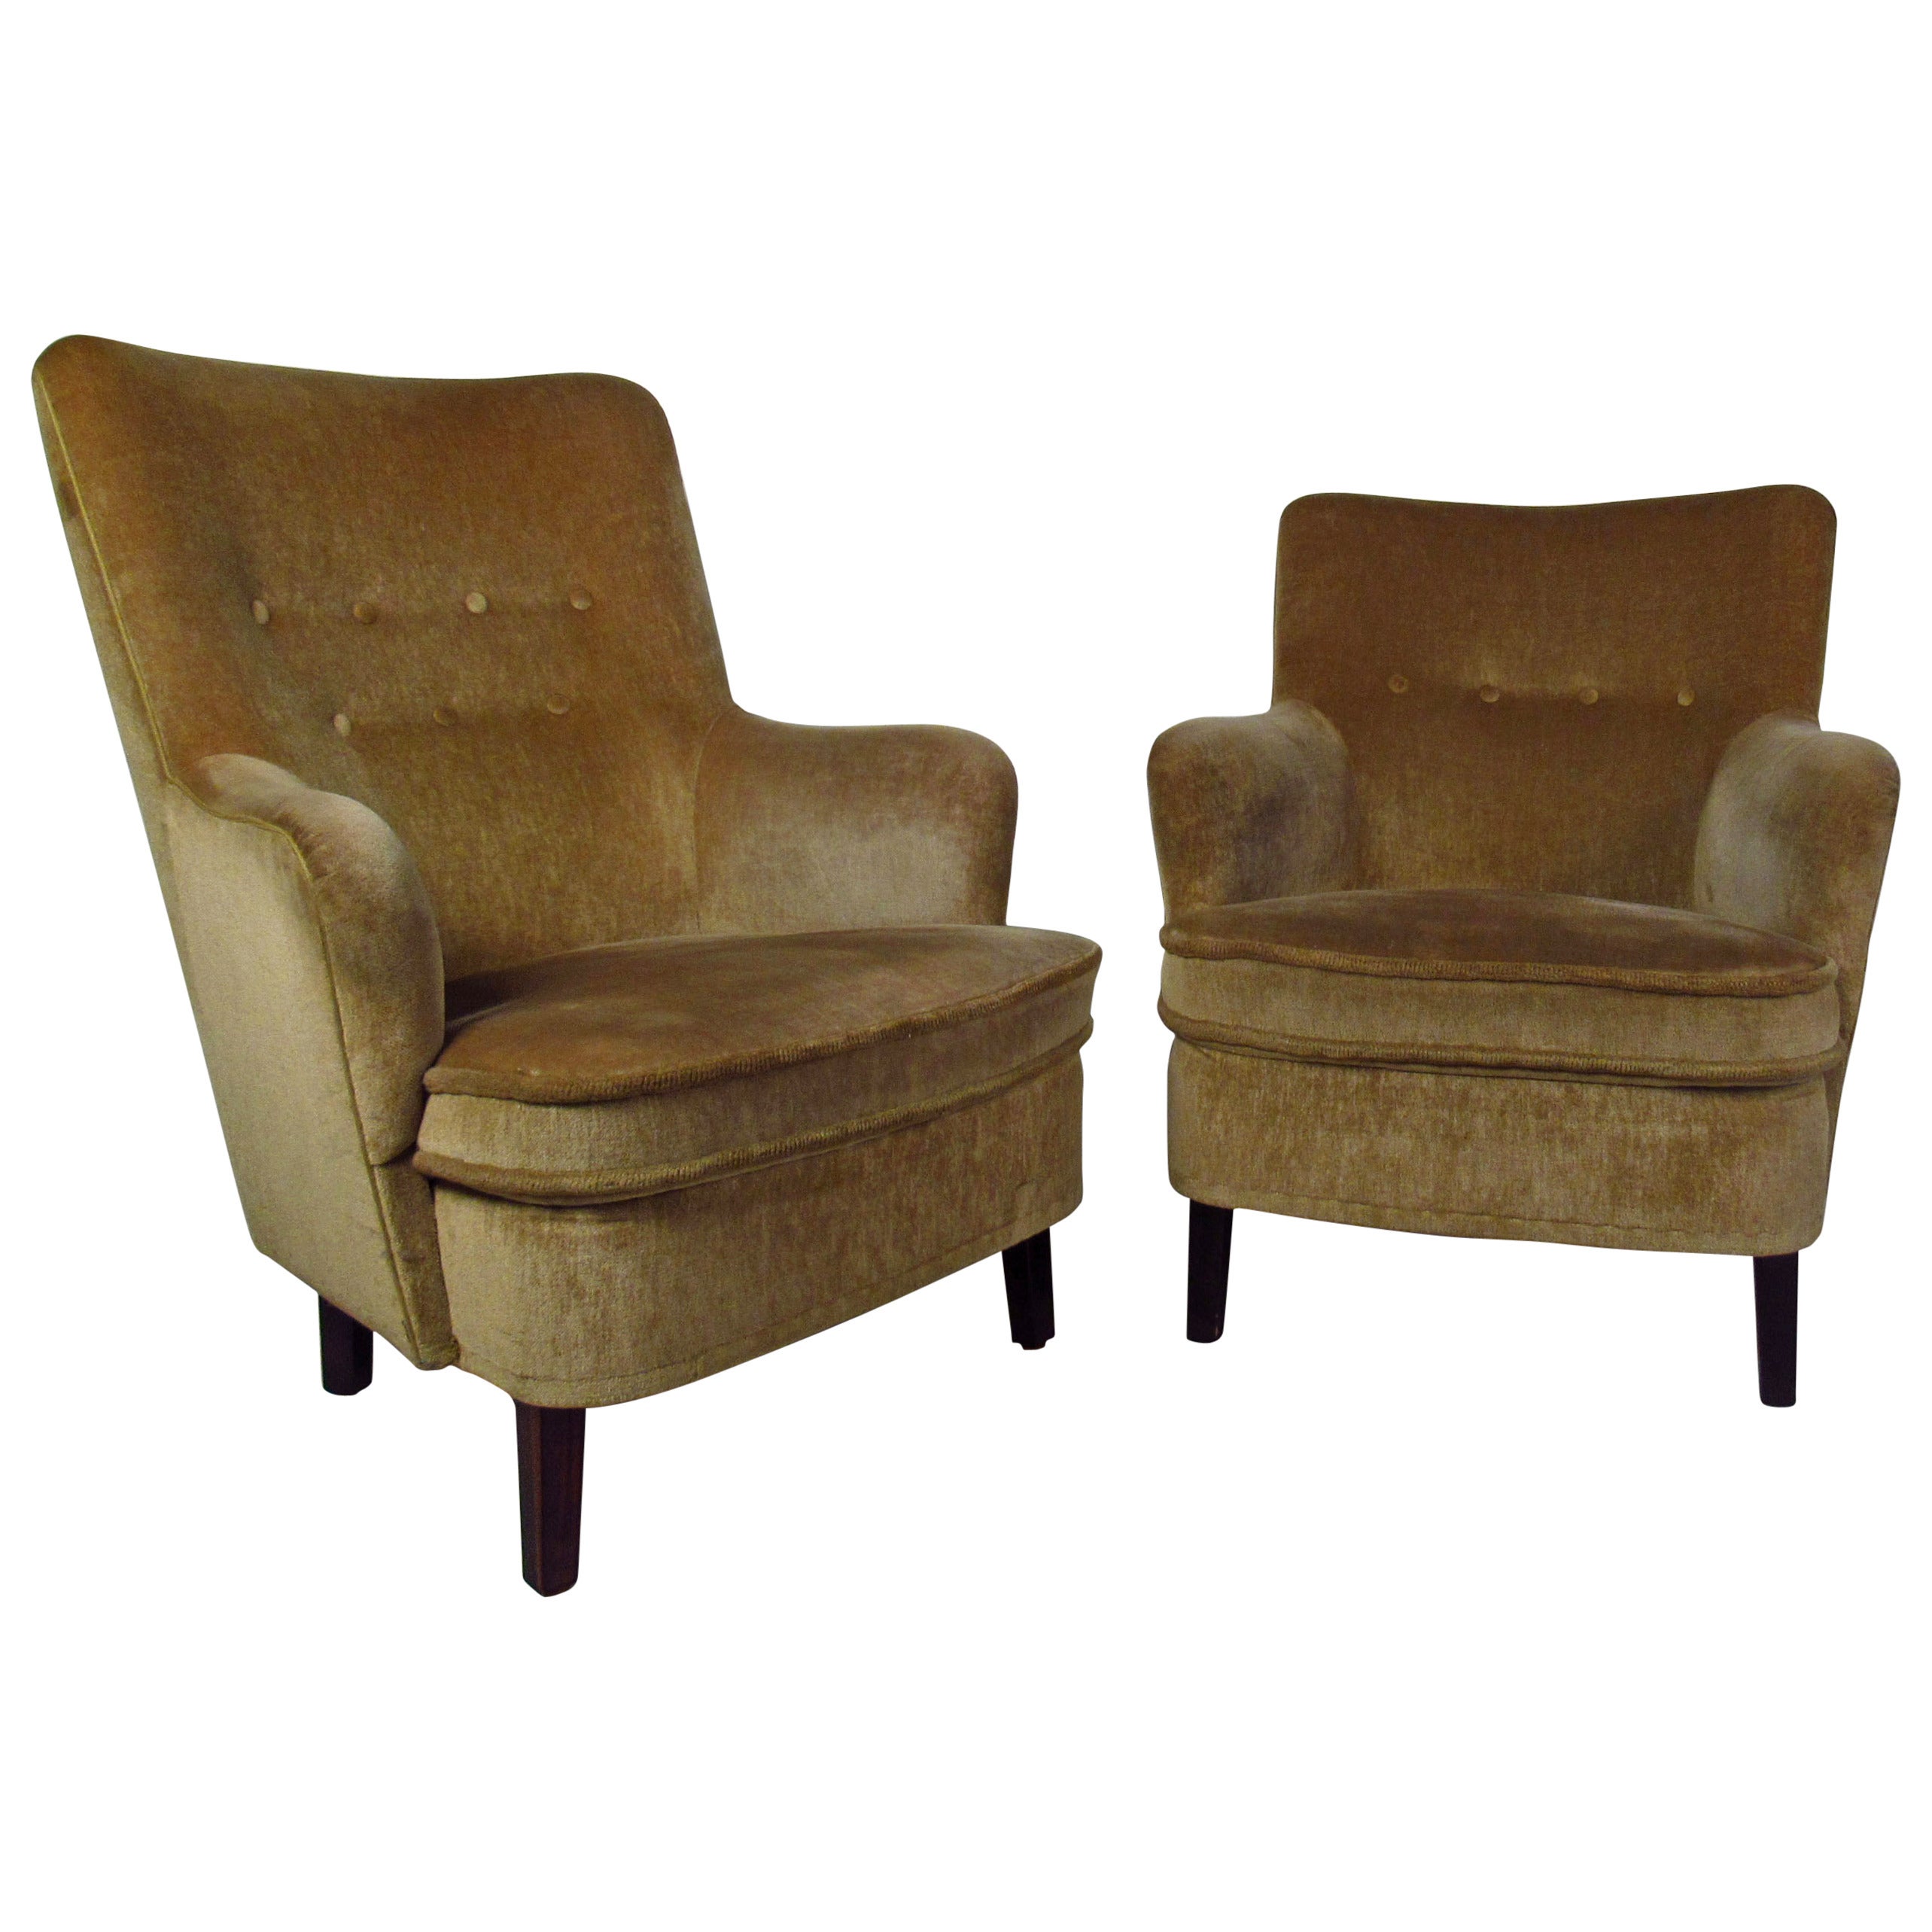 "His and Her" Danish Modern Lounge Chairs